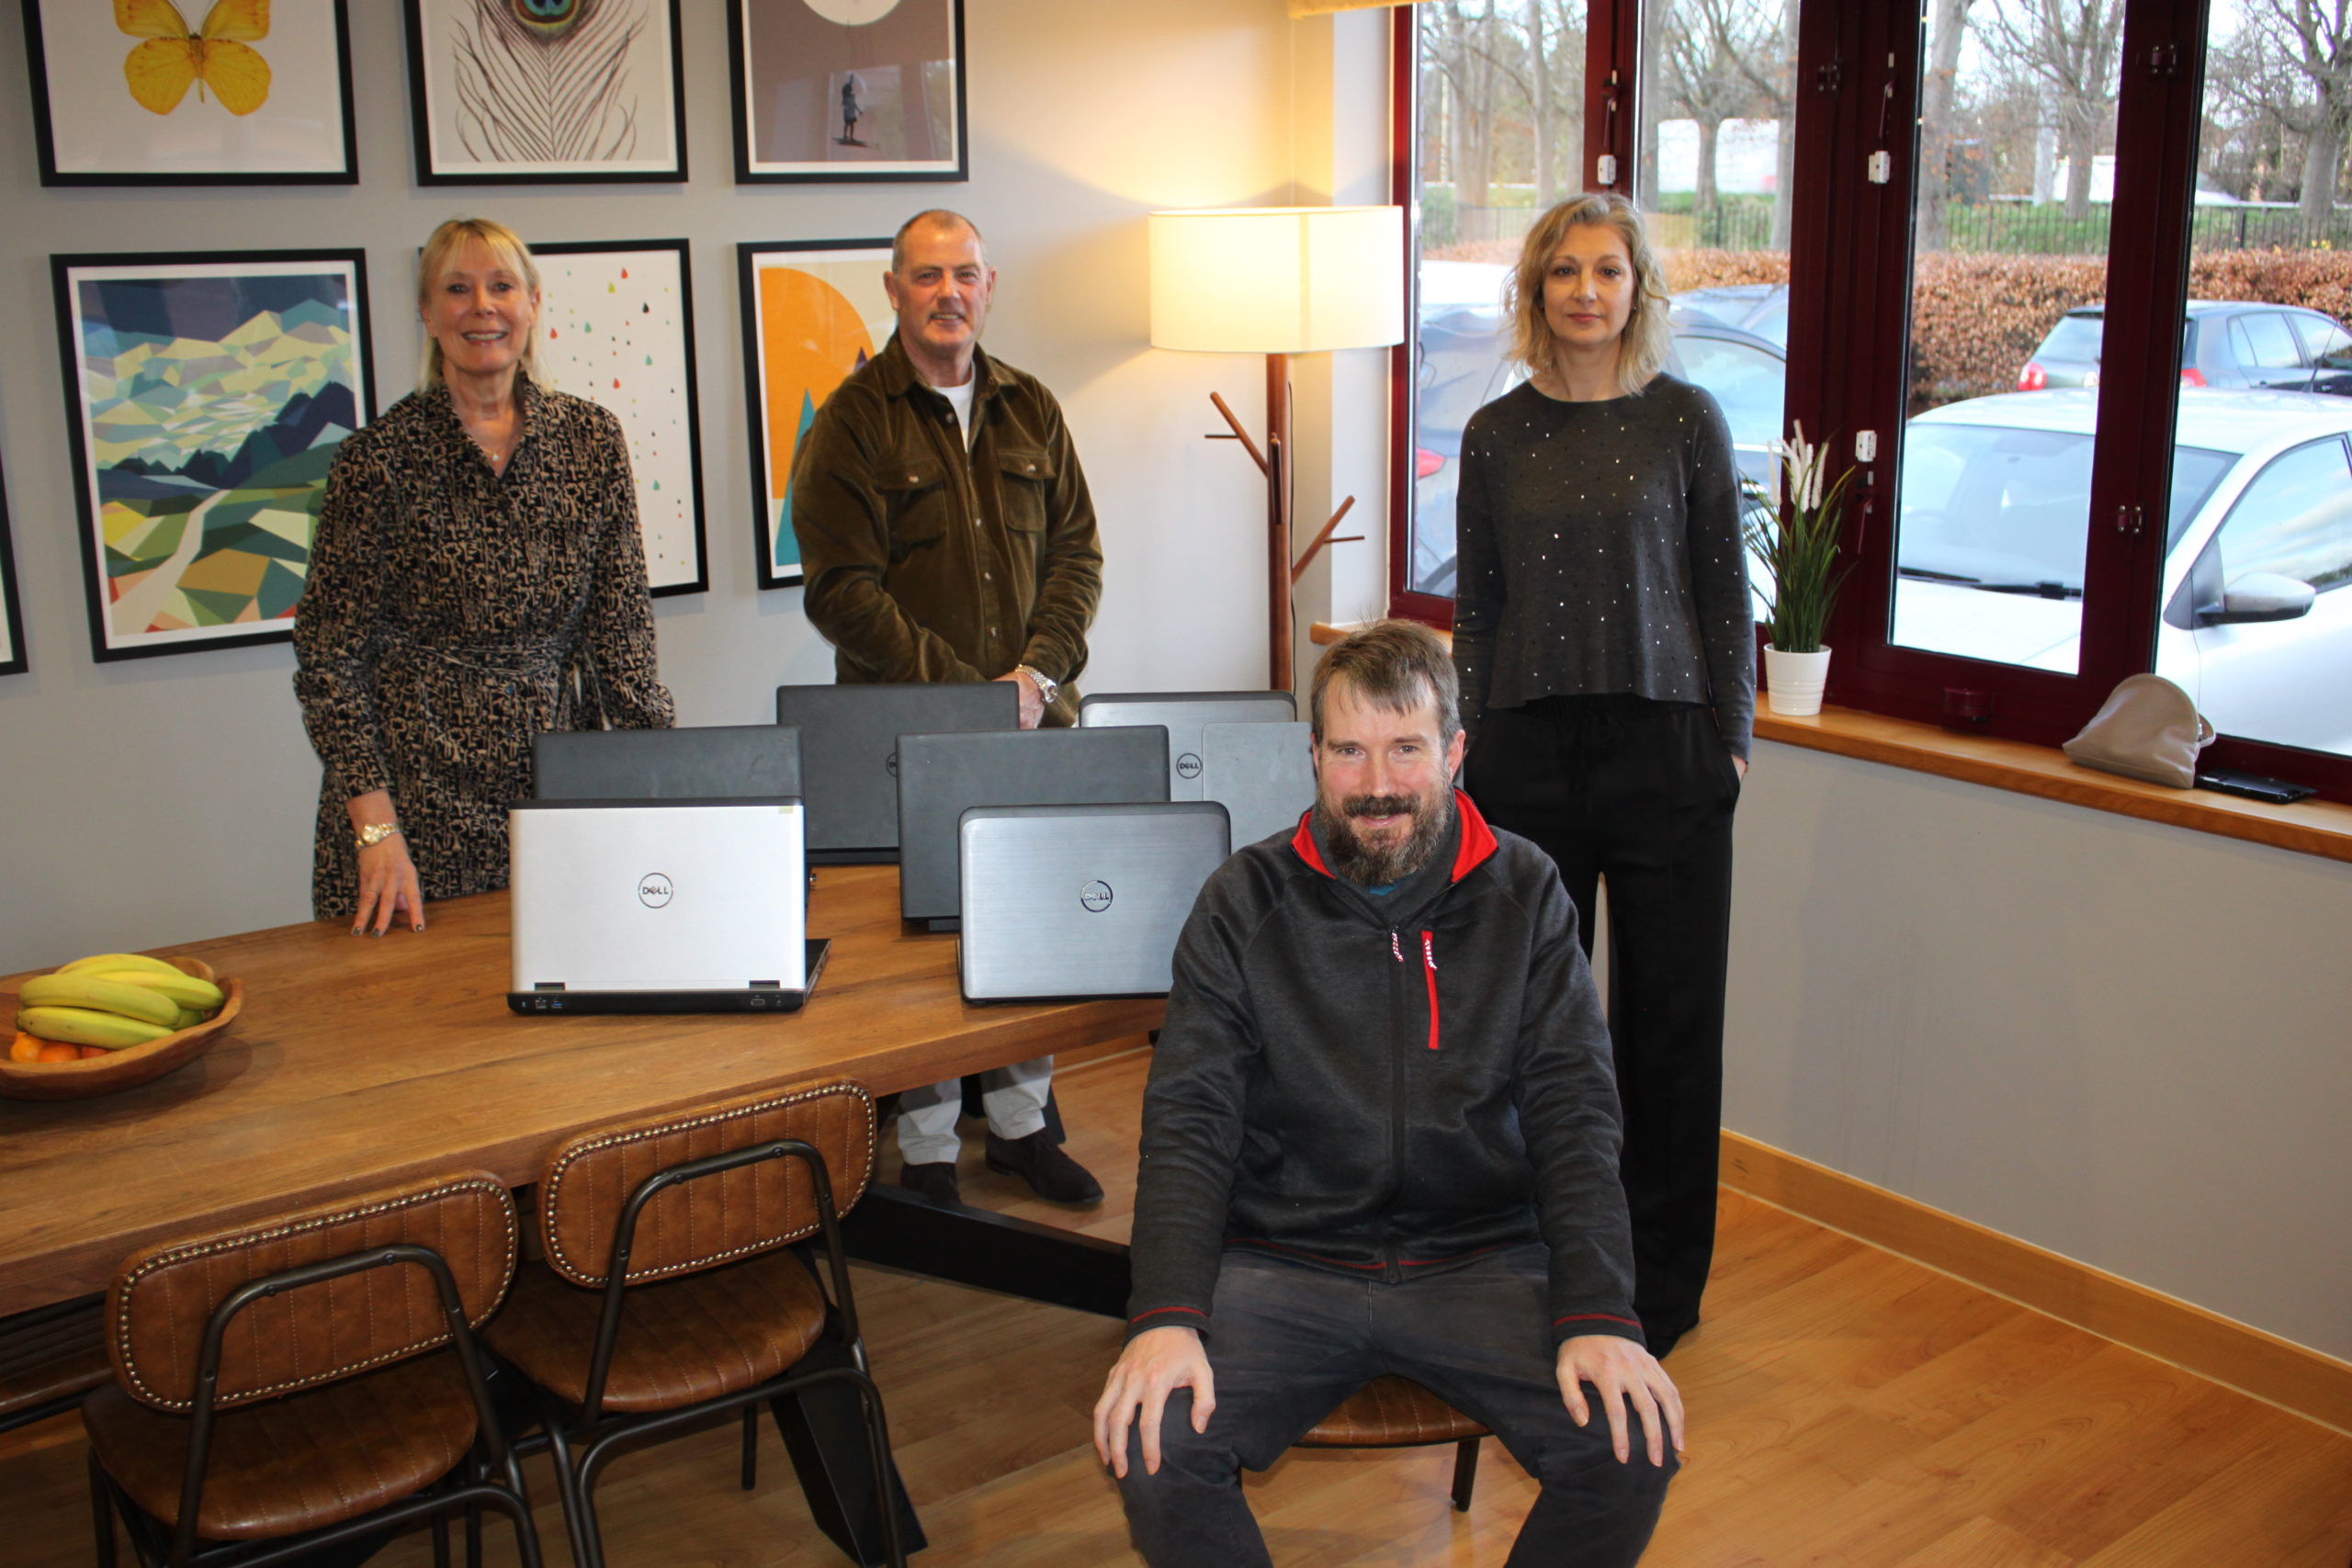 Kate and Rob Allen and Eleanor Bromage pose with John Dennis from Aspire with the seven laptops